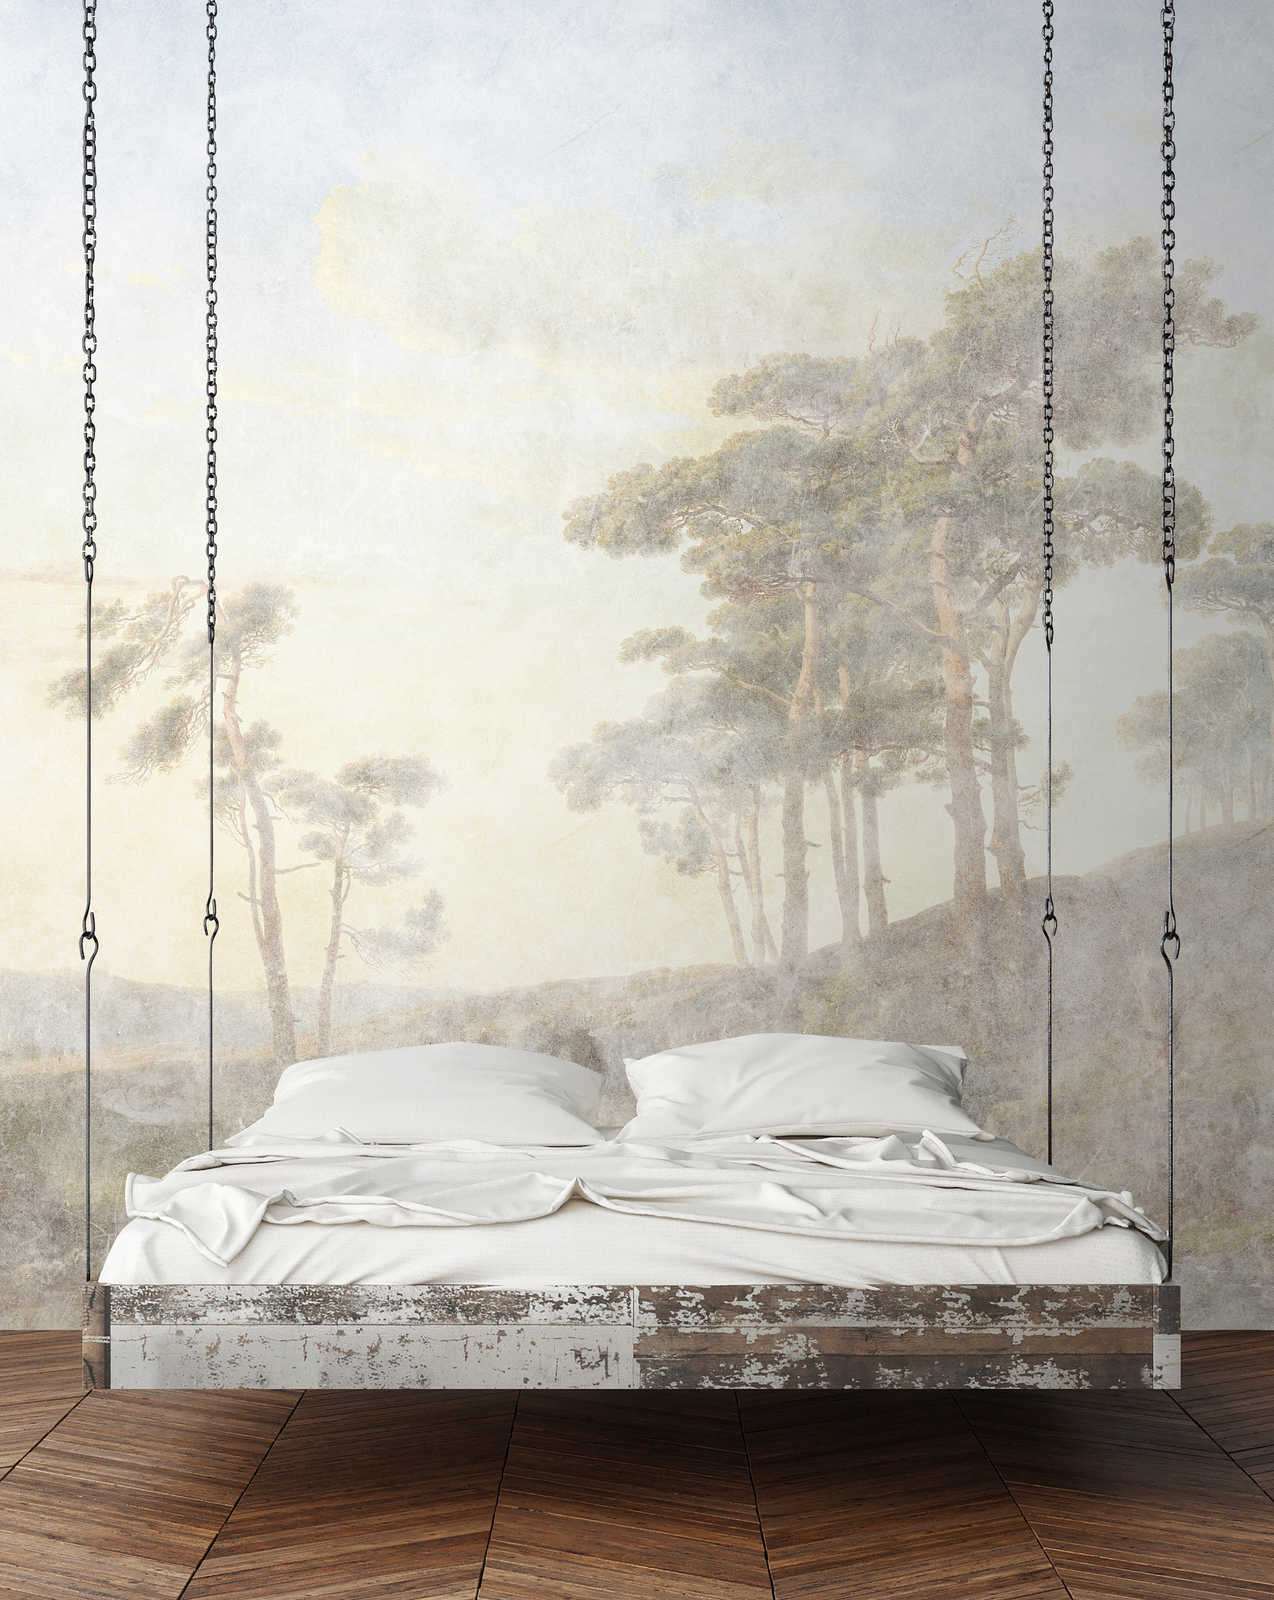             Romantic Grove 1 - painting photo wallpaper faded used look
        